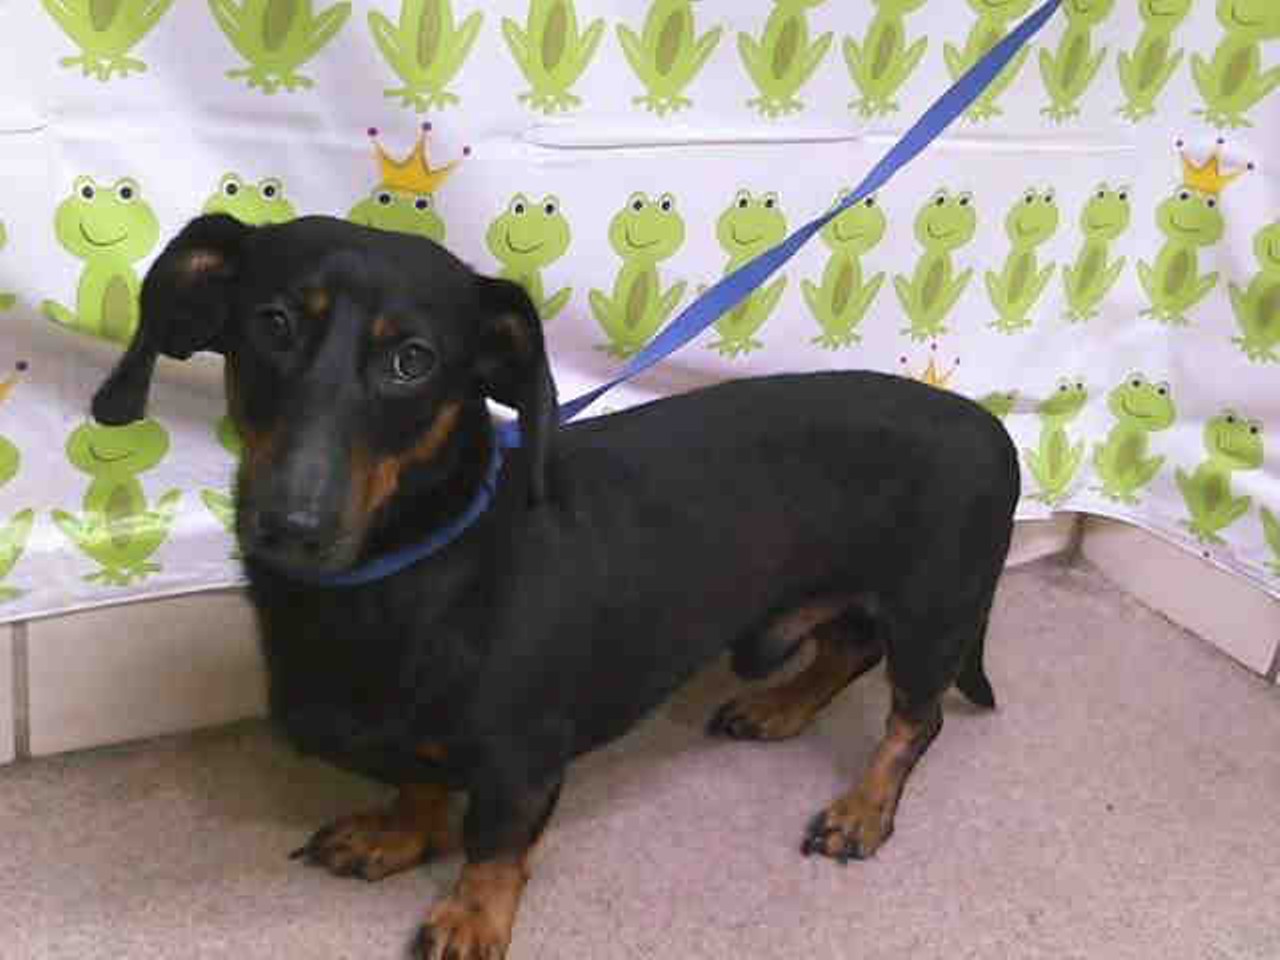 This dachshund didn't have a name, but his shelter ID is A266176